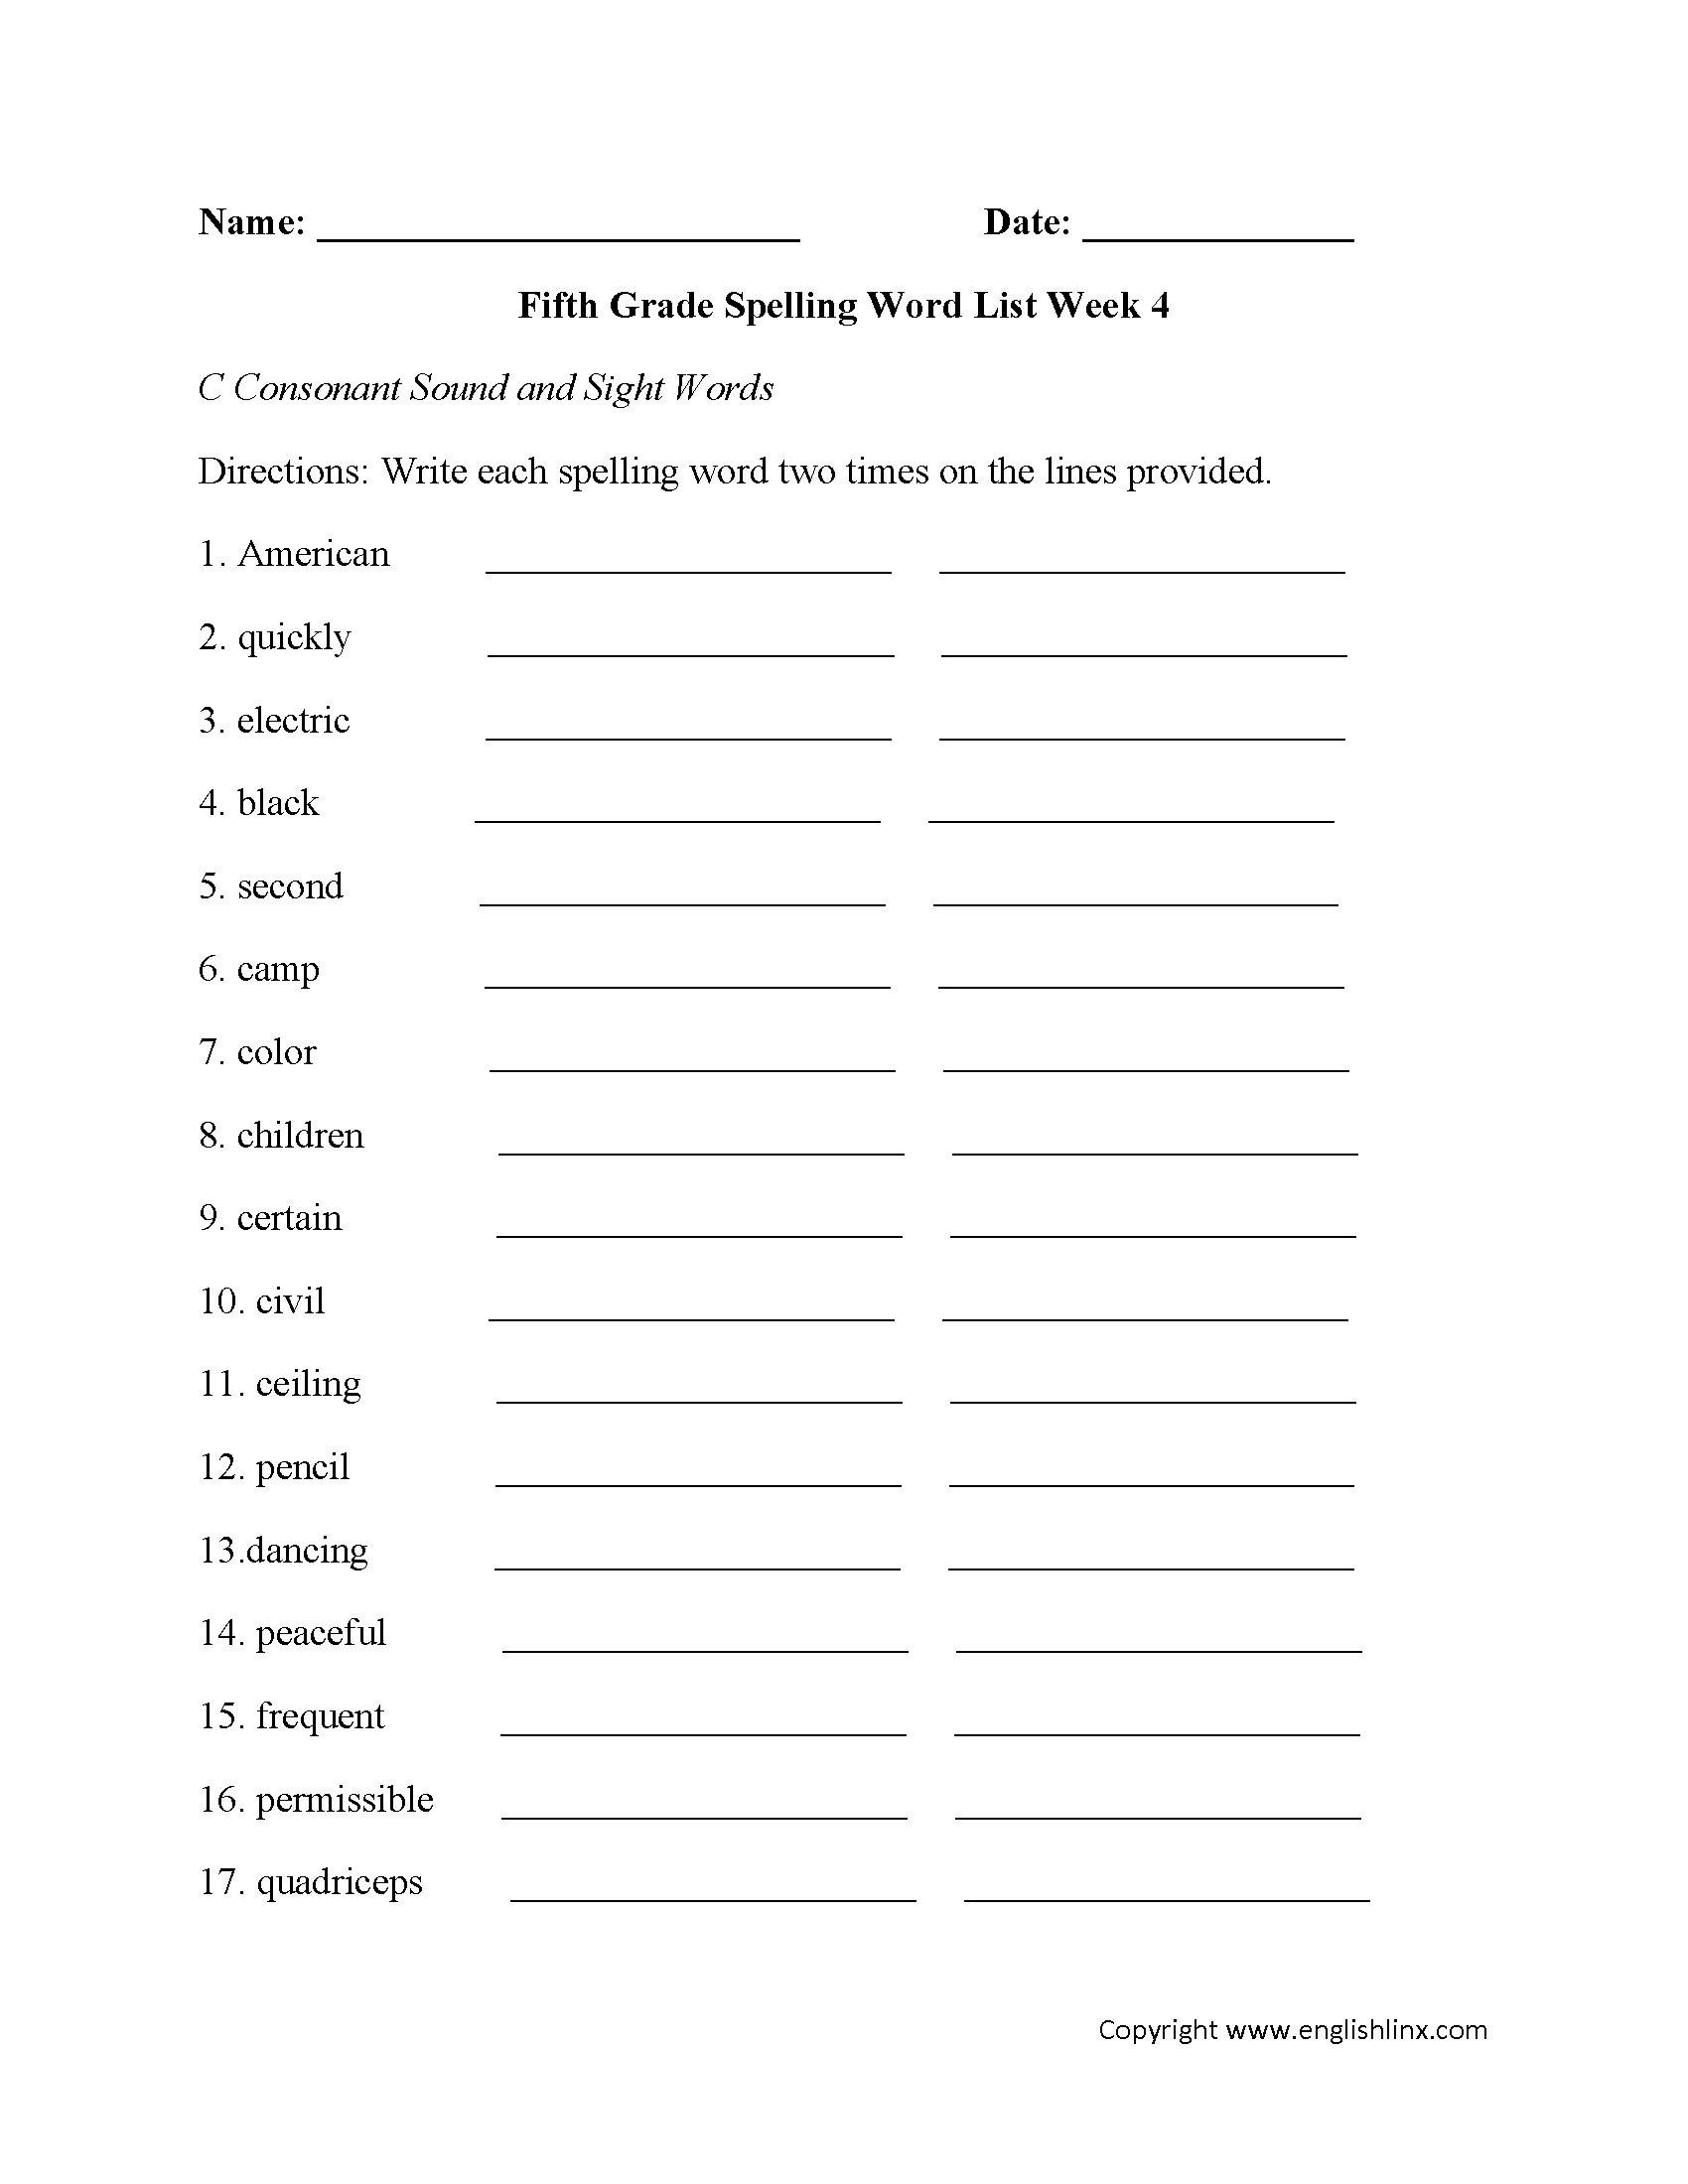 Week 4 C Consonant and Sight Words Fifth Grade Spelling Words Worksheets